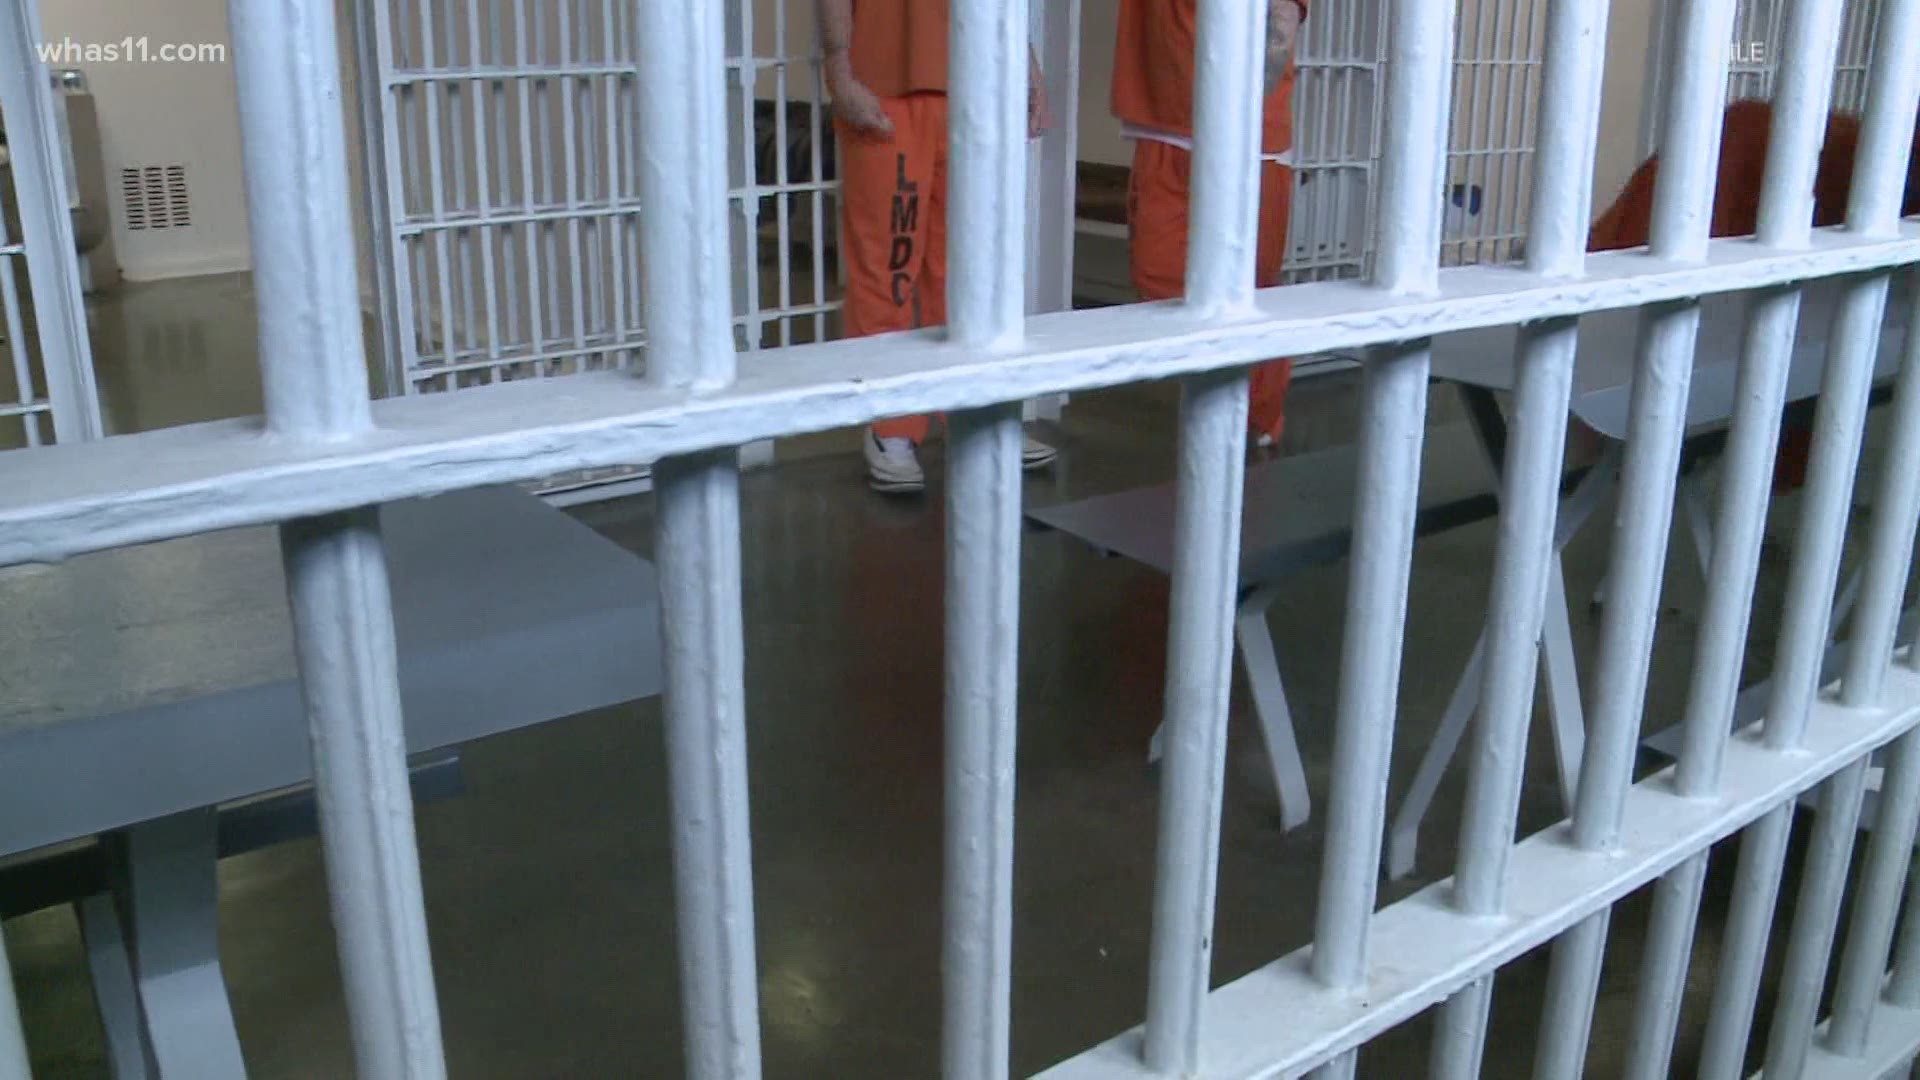 Three Metro Corrections officers were injured in three separate incidents with inmates in the past 24 hours as the FOP pushes for changes.